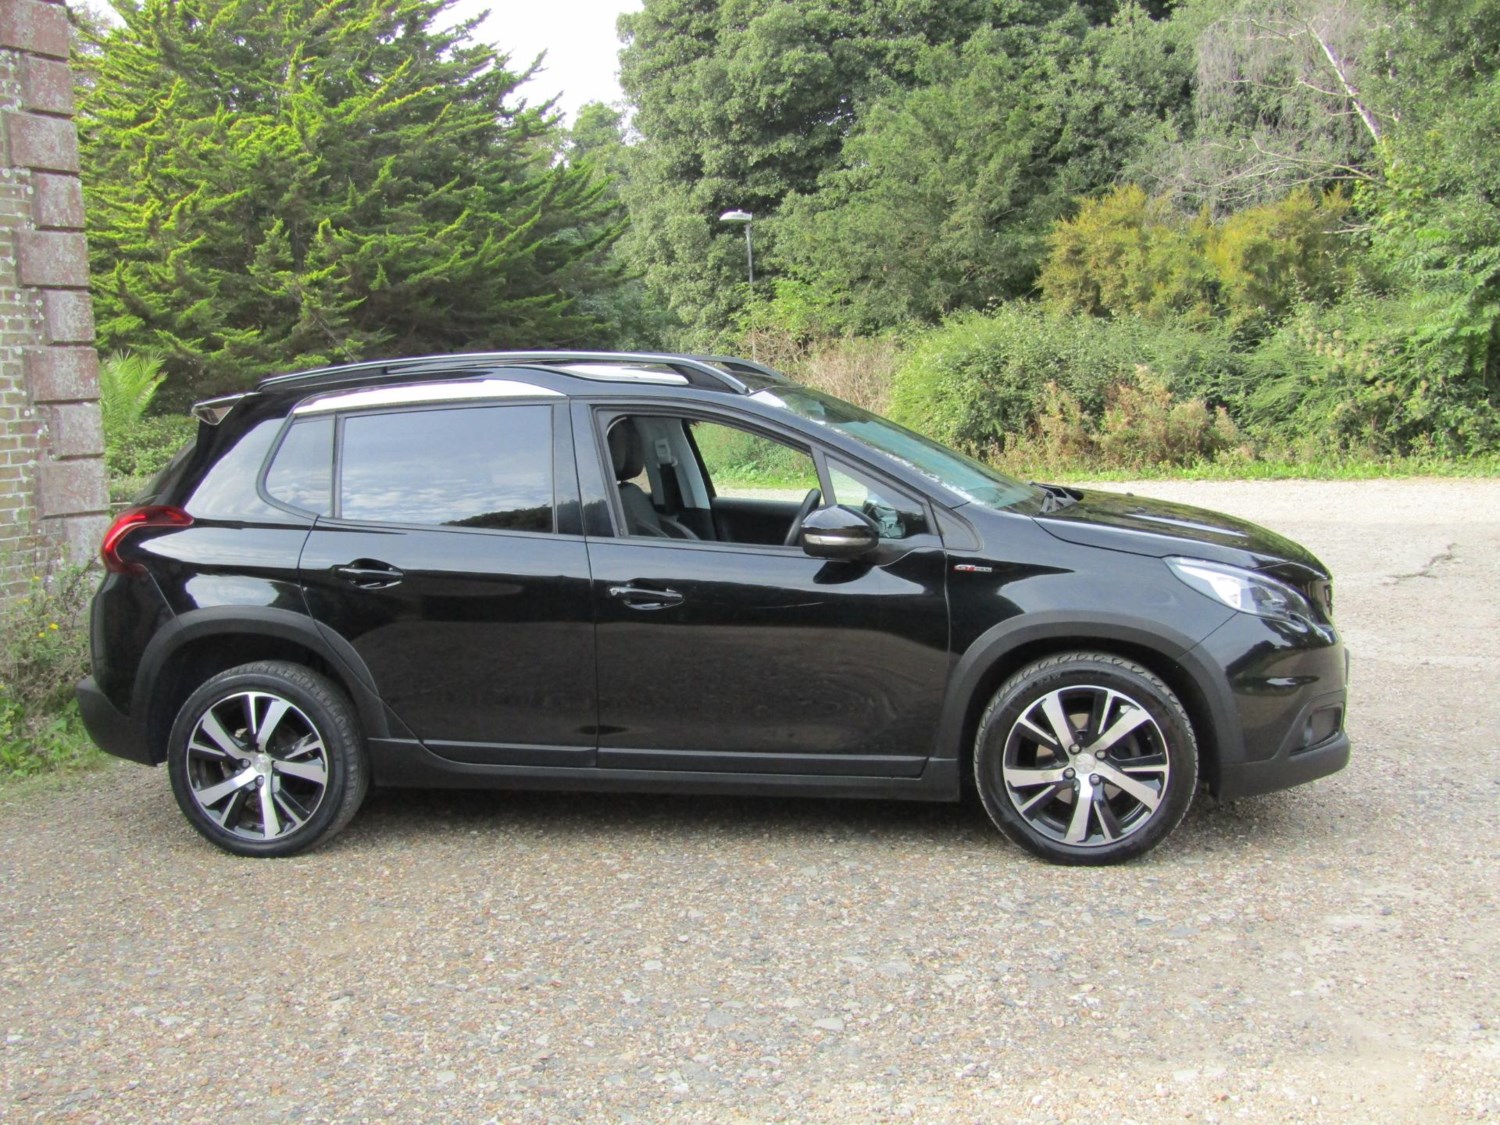 2018 (67) Peugeot 2008 1.6 BlueHDi 120 GT Line 5dr For Sale In Broadstairs, Kent